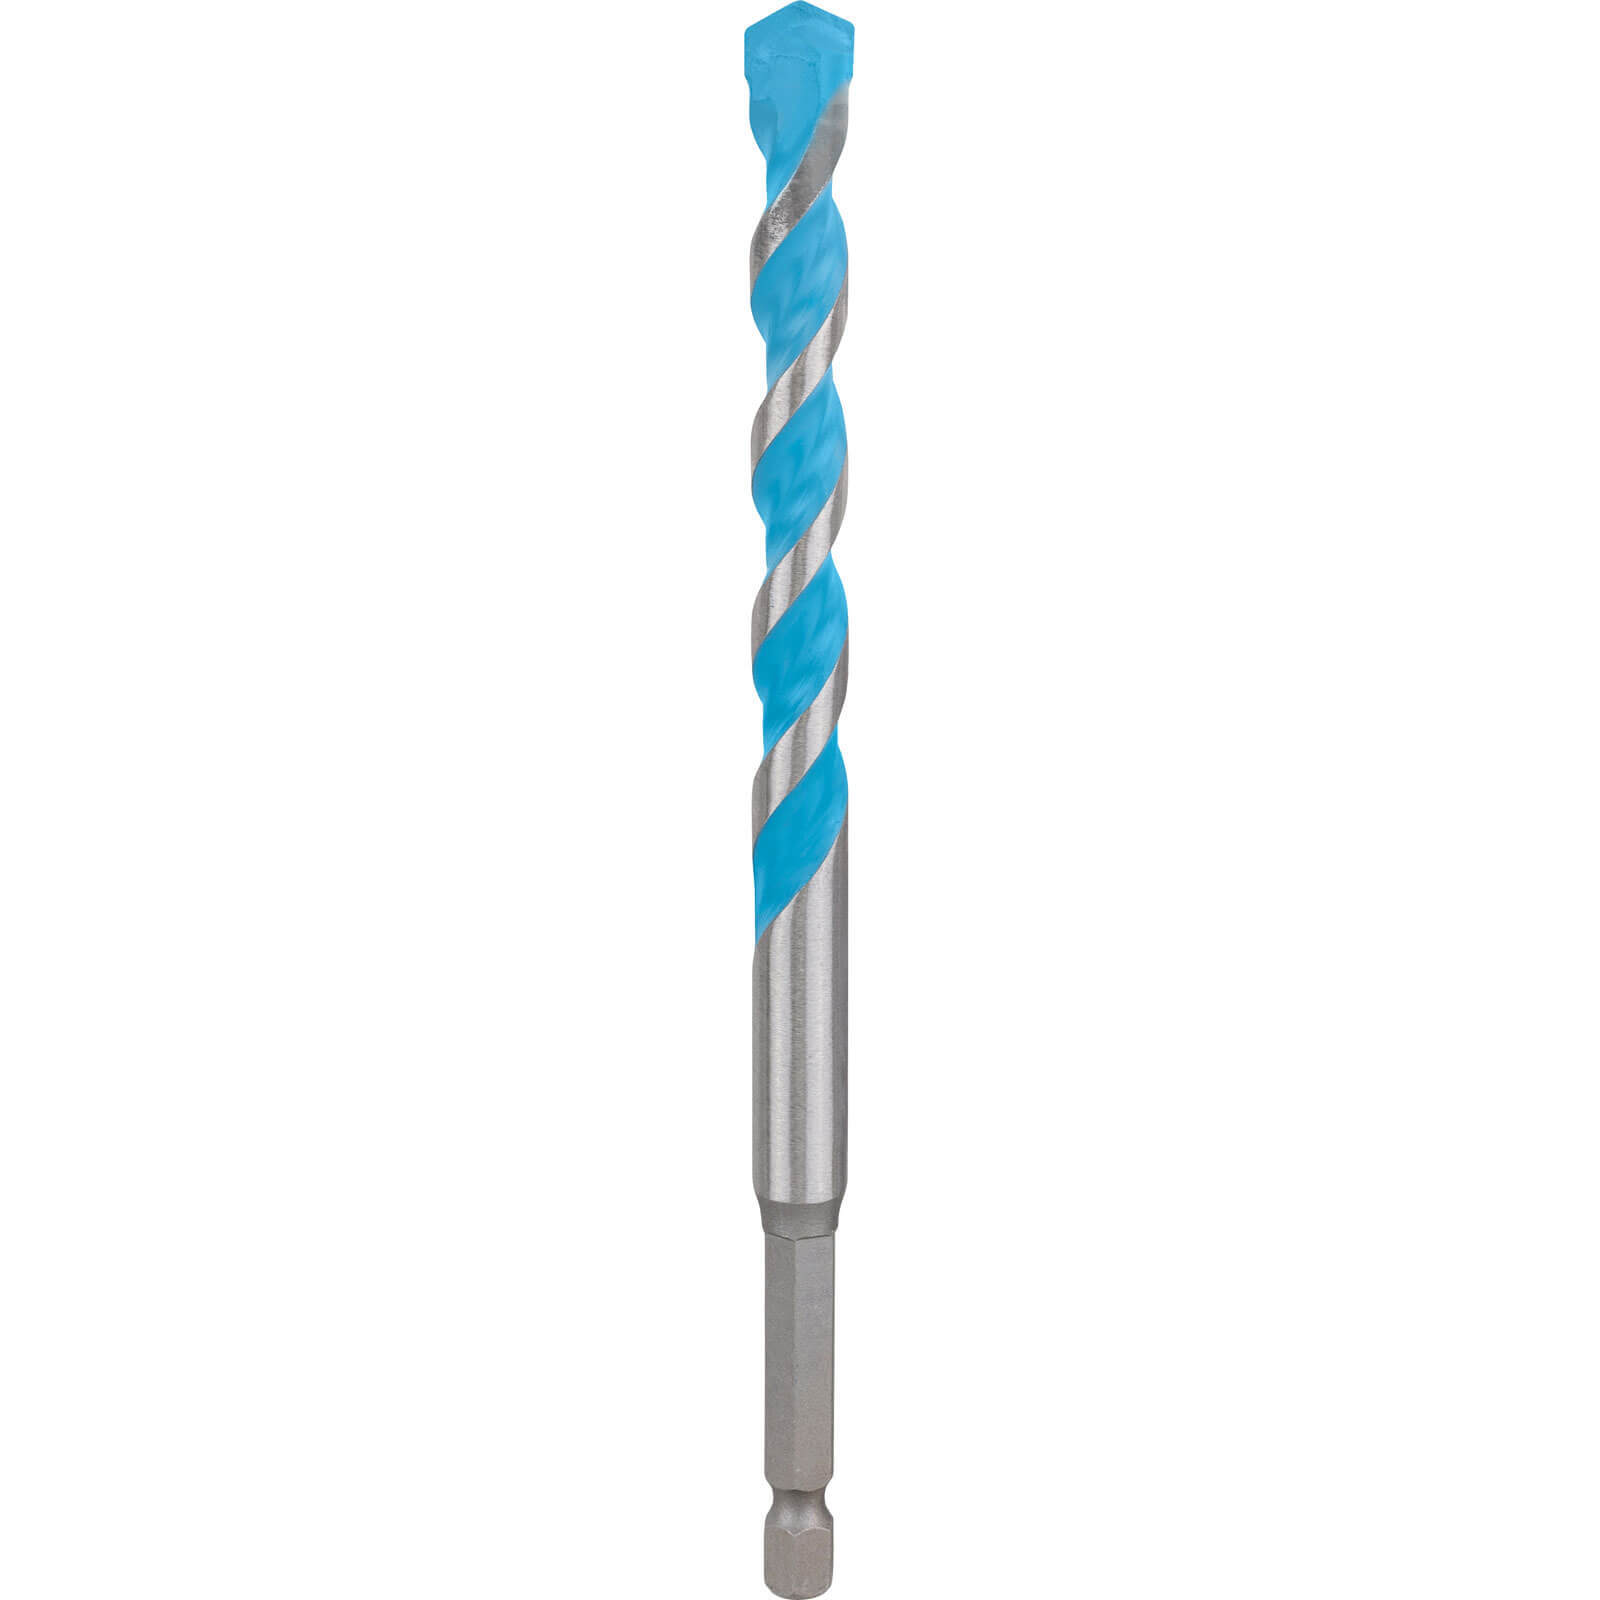 Image of Bosch Expert HEX-9 Multi Construction Drill Bit 12mm 150mm Pack of 1